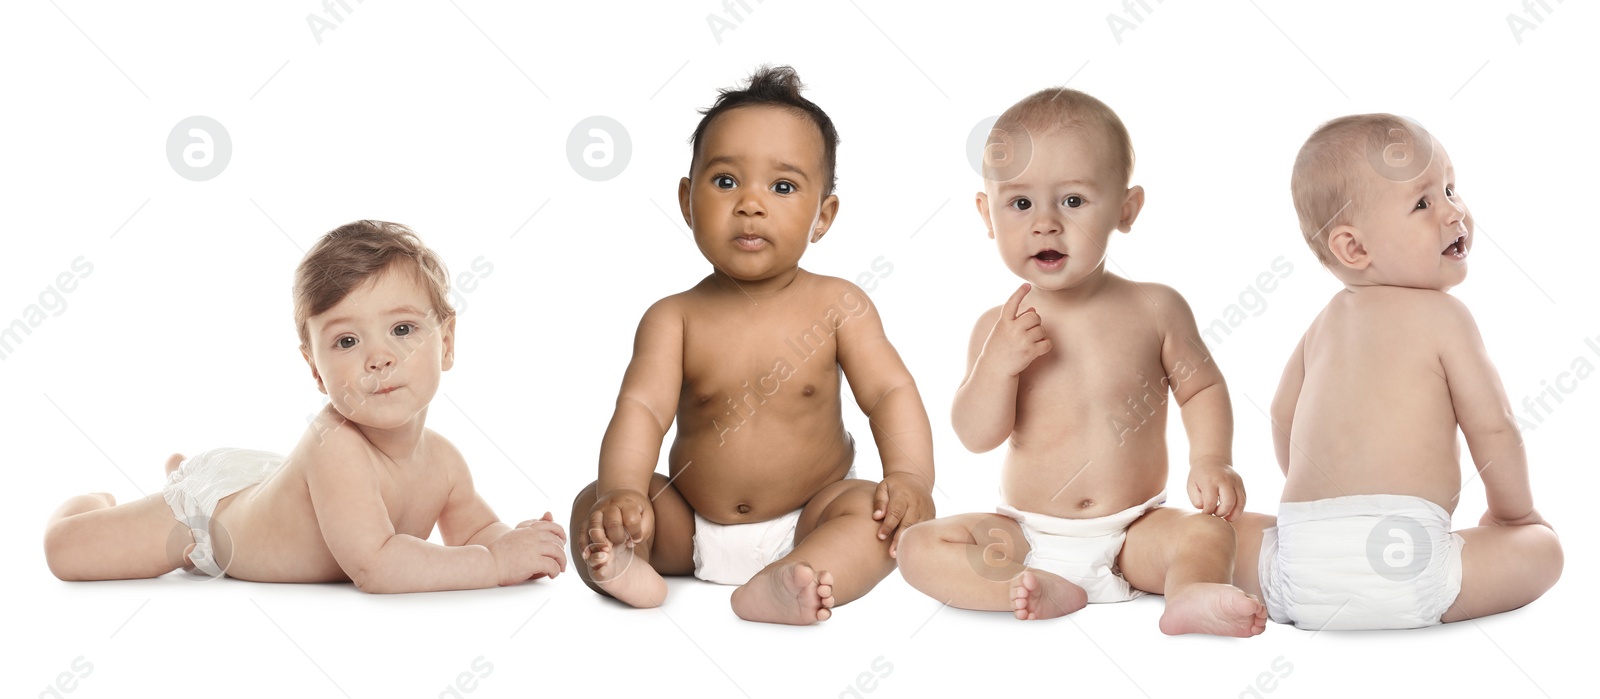 Image of Collage with photos of cute babies in diapers on white background. Banner design